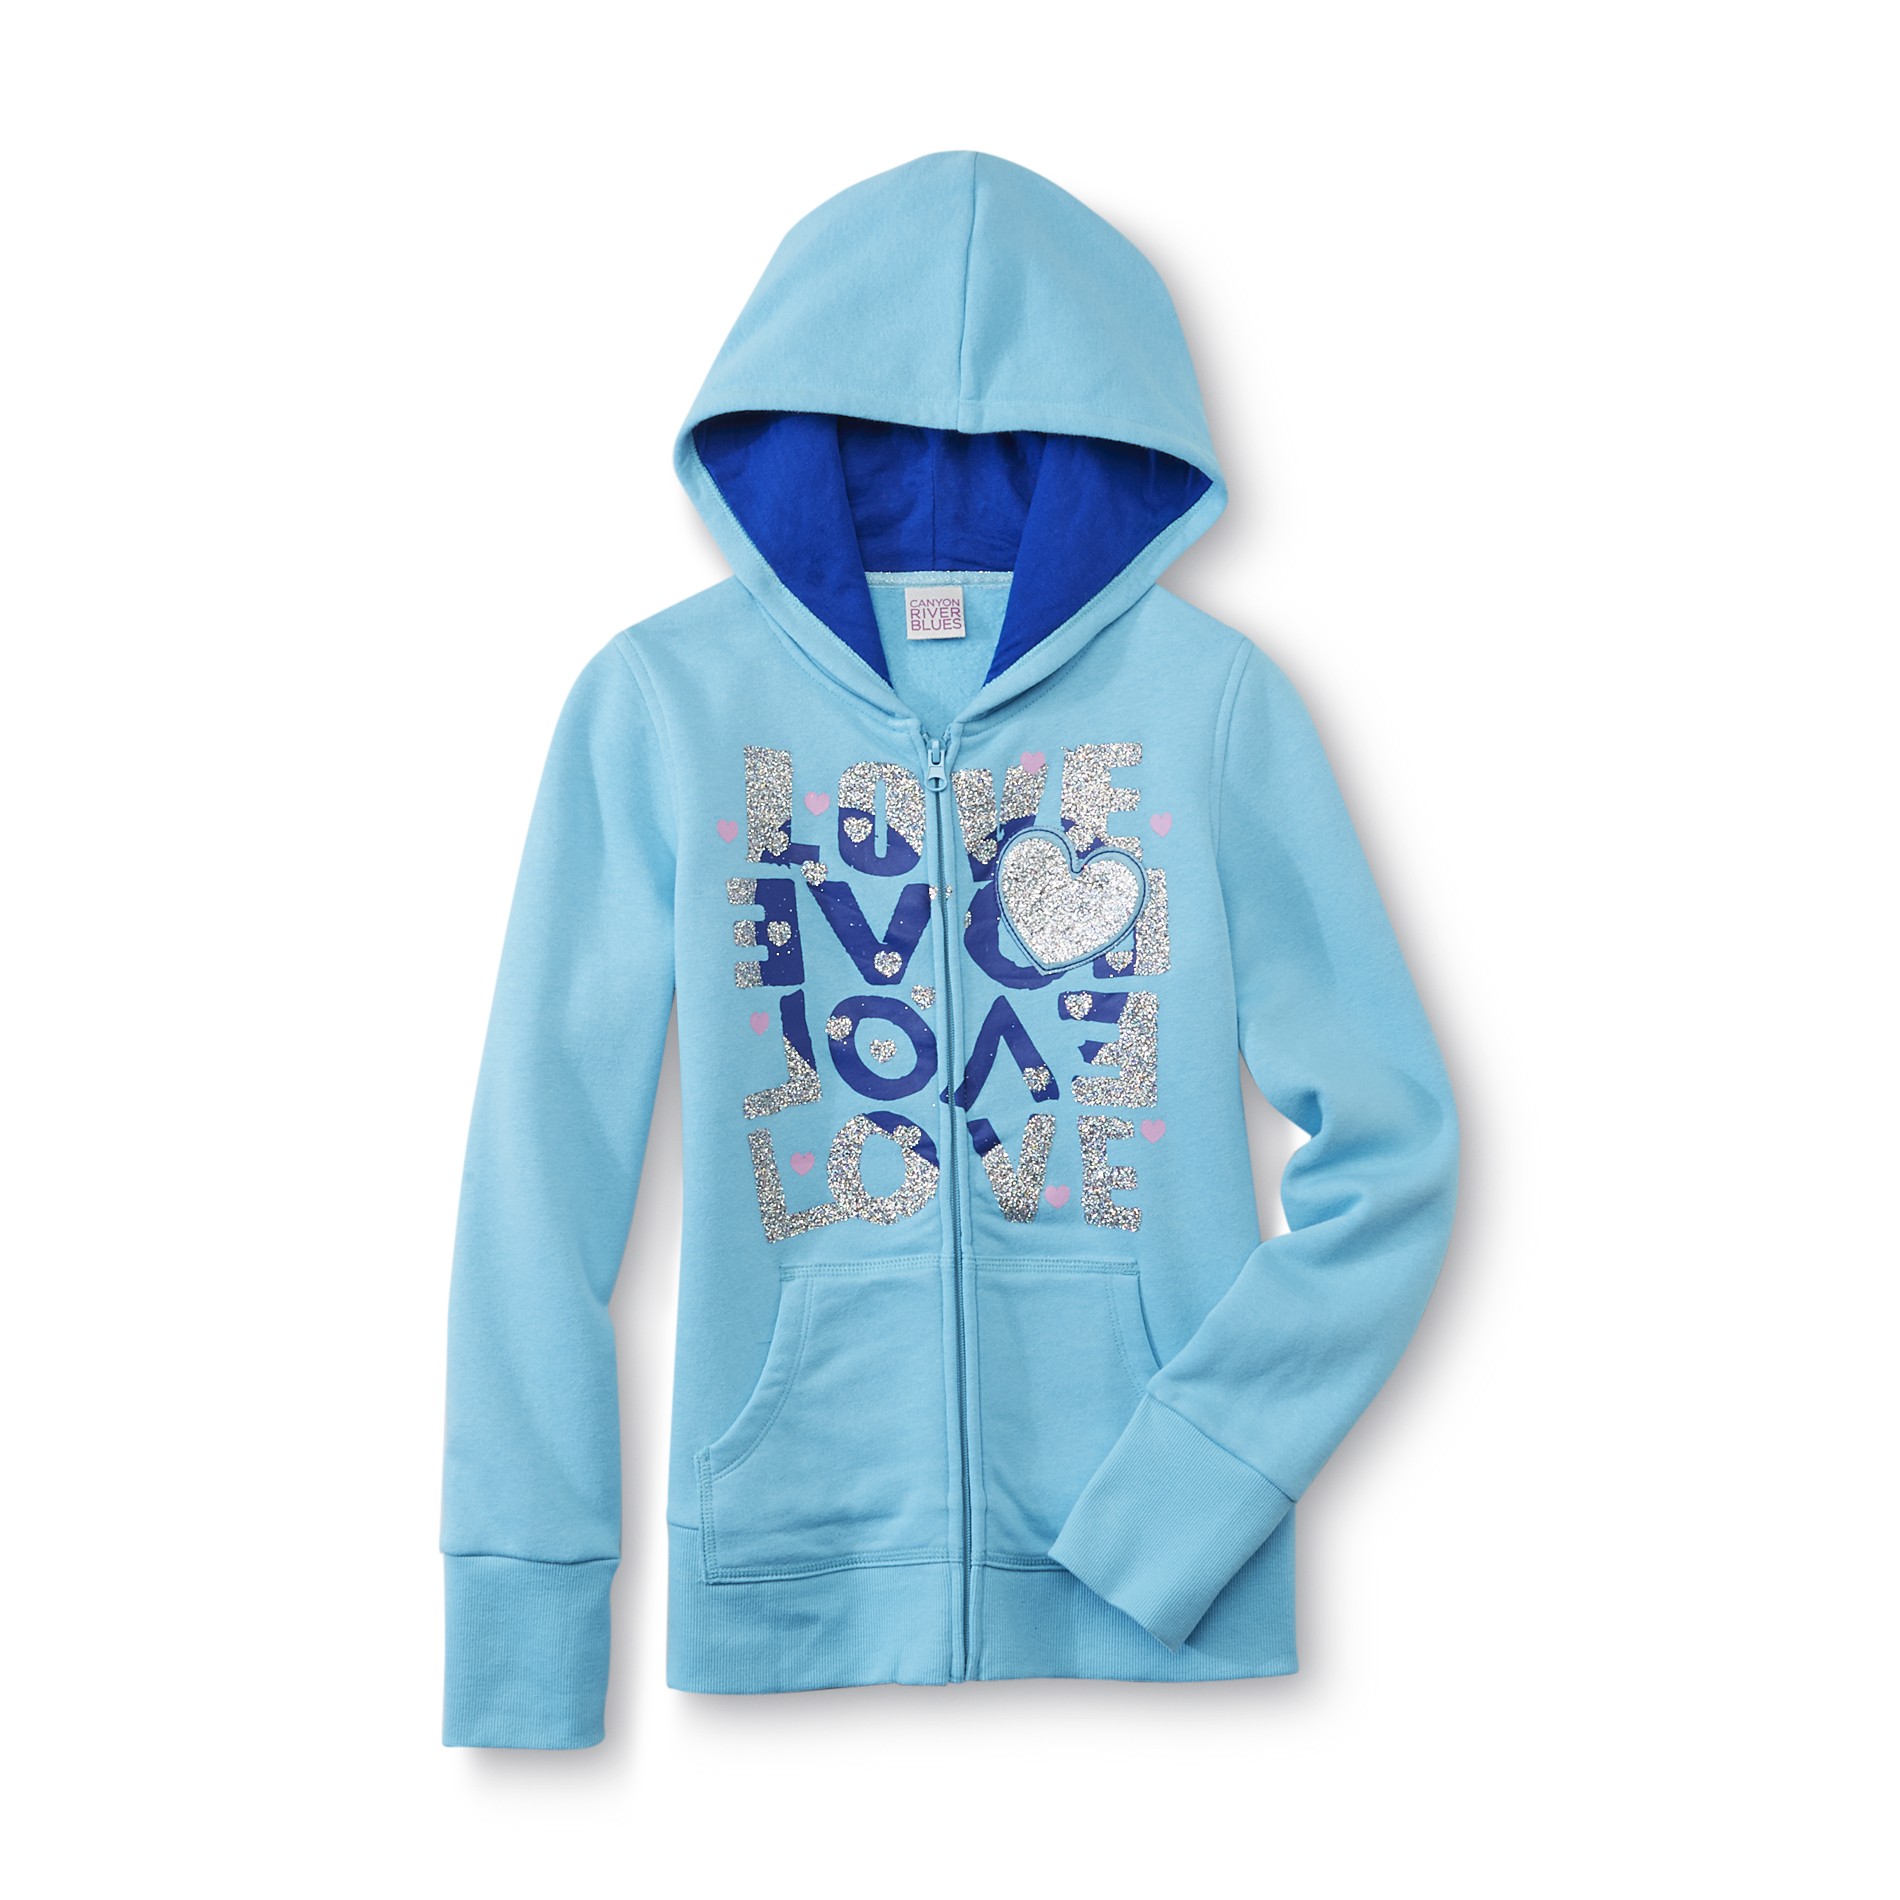 Canyon River Blues Girl's Hoodie Jacket - Love